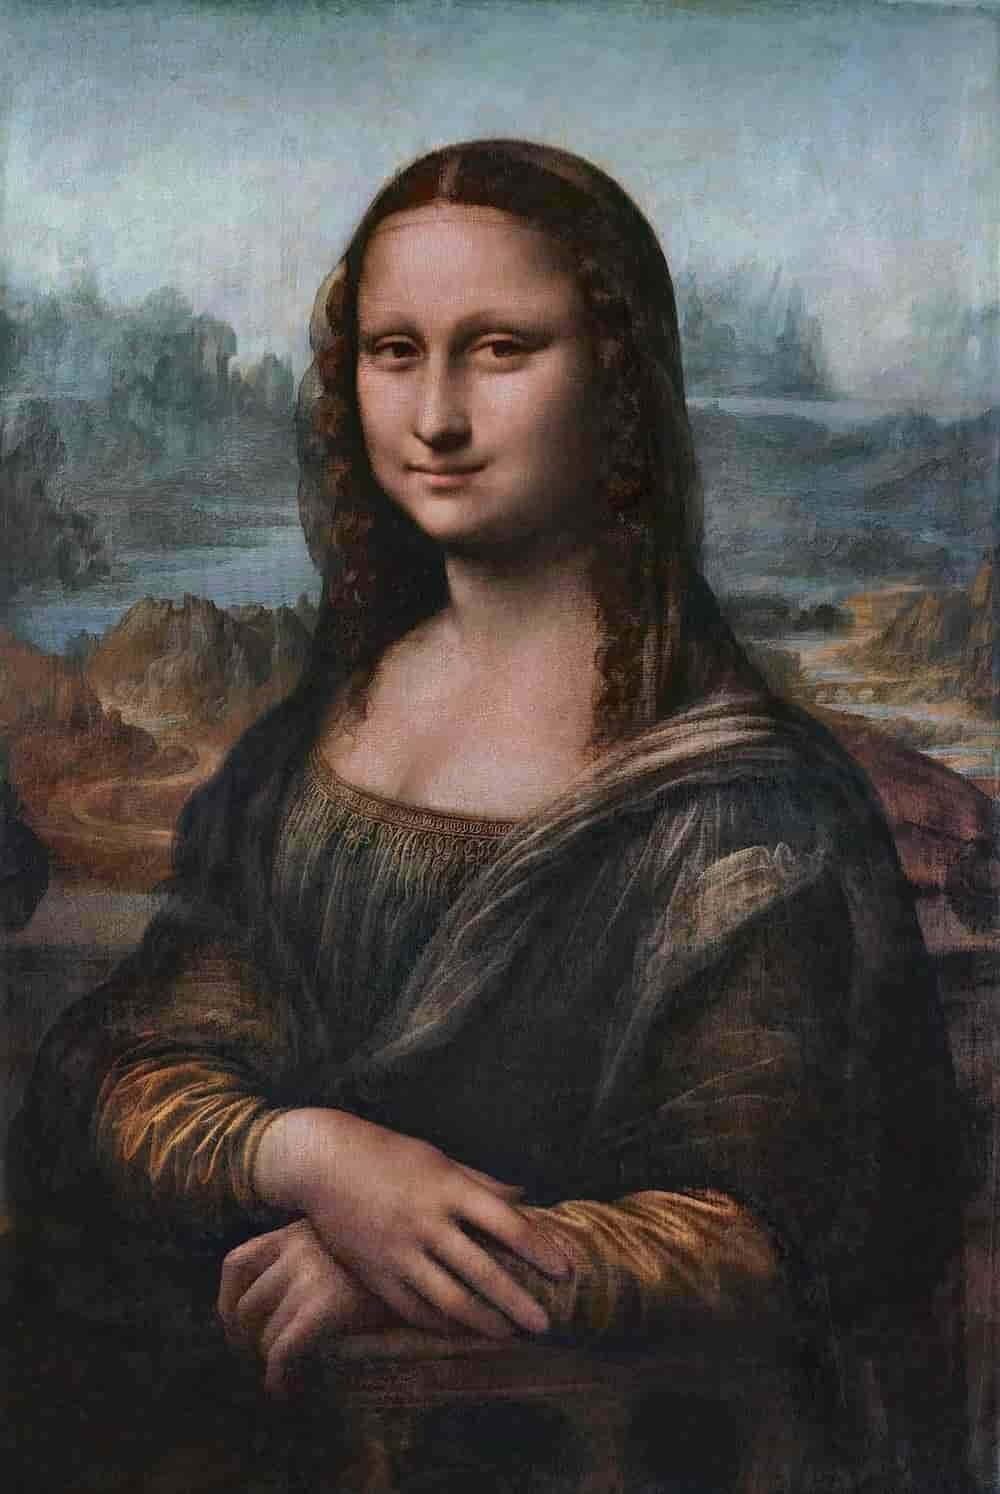 Mona Lisa the most famous painting in the world